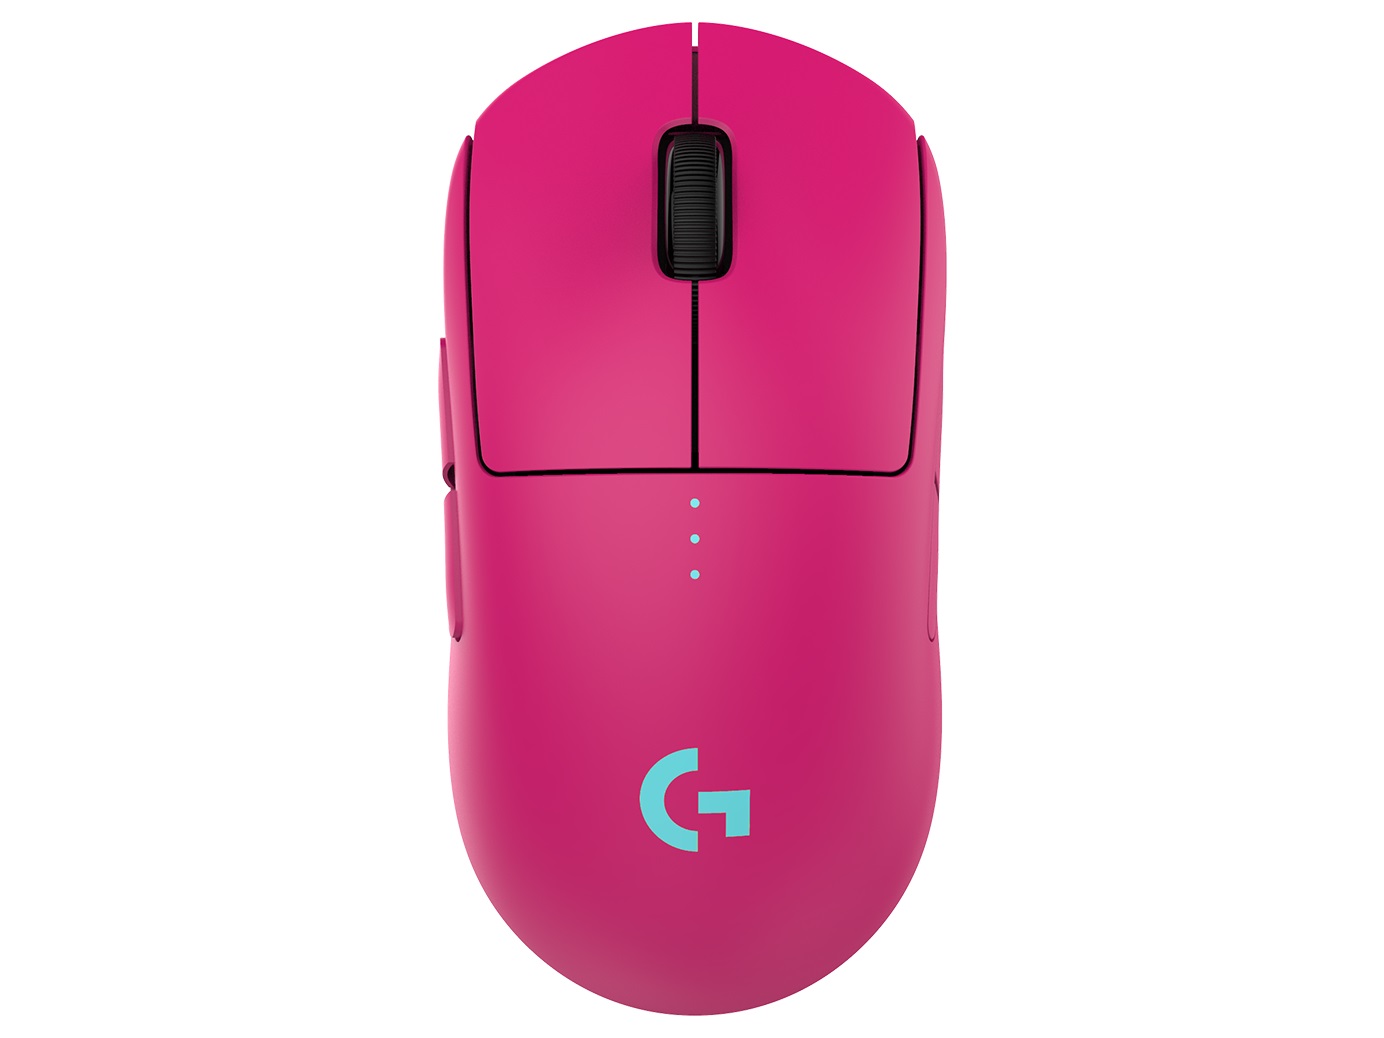 Logitech launches the limited edition “GHOST” gaming mouse |